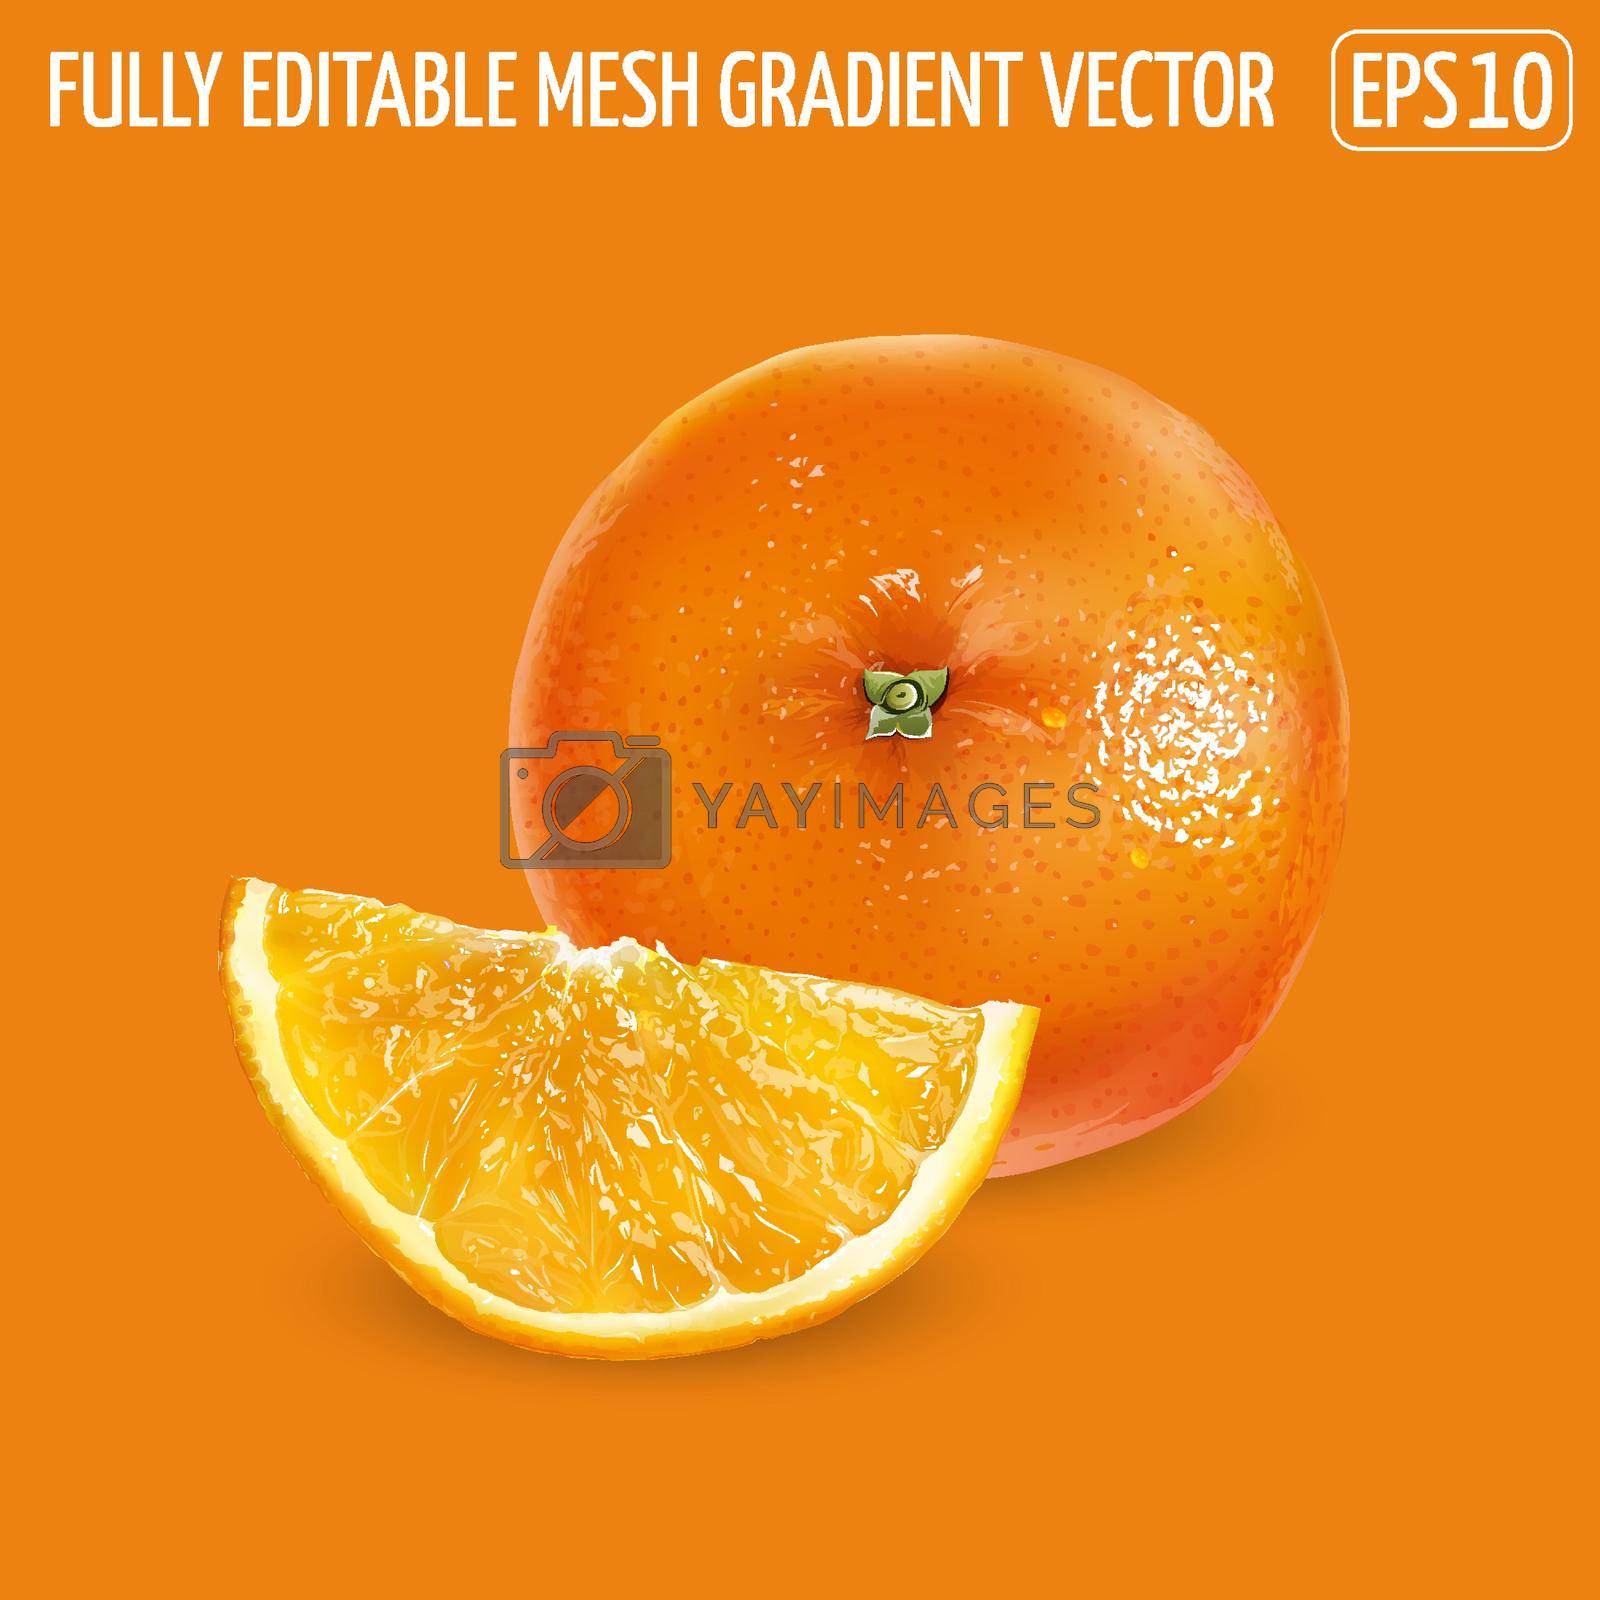 Royalty free image of Whole orange with cut slice on an orange background. by ConceptCafe